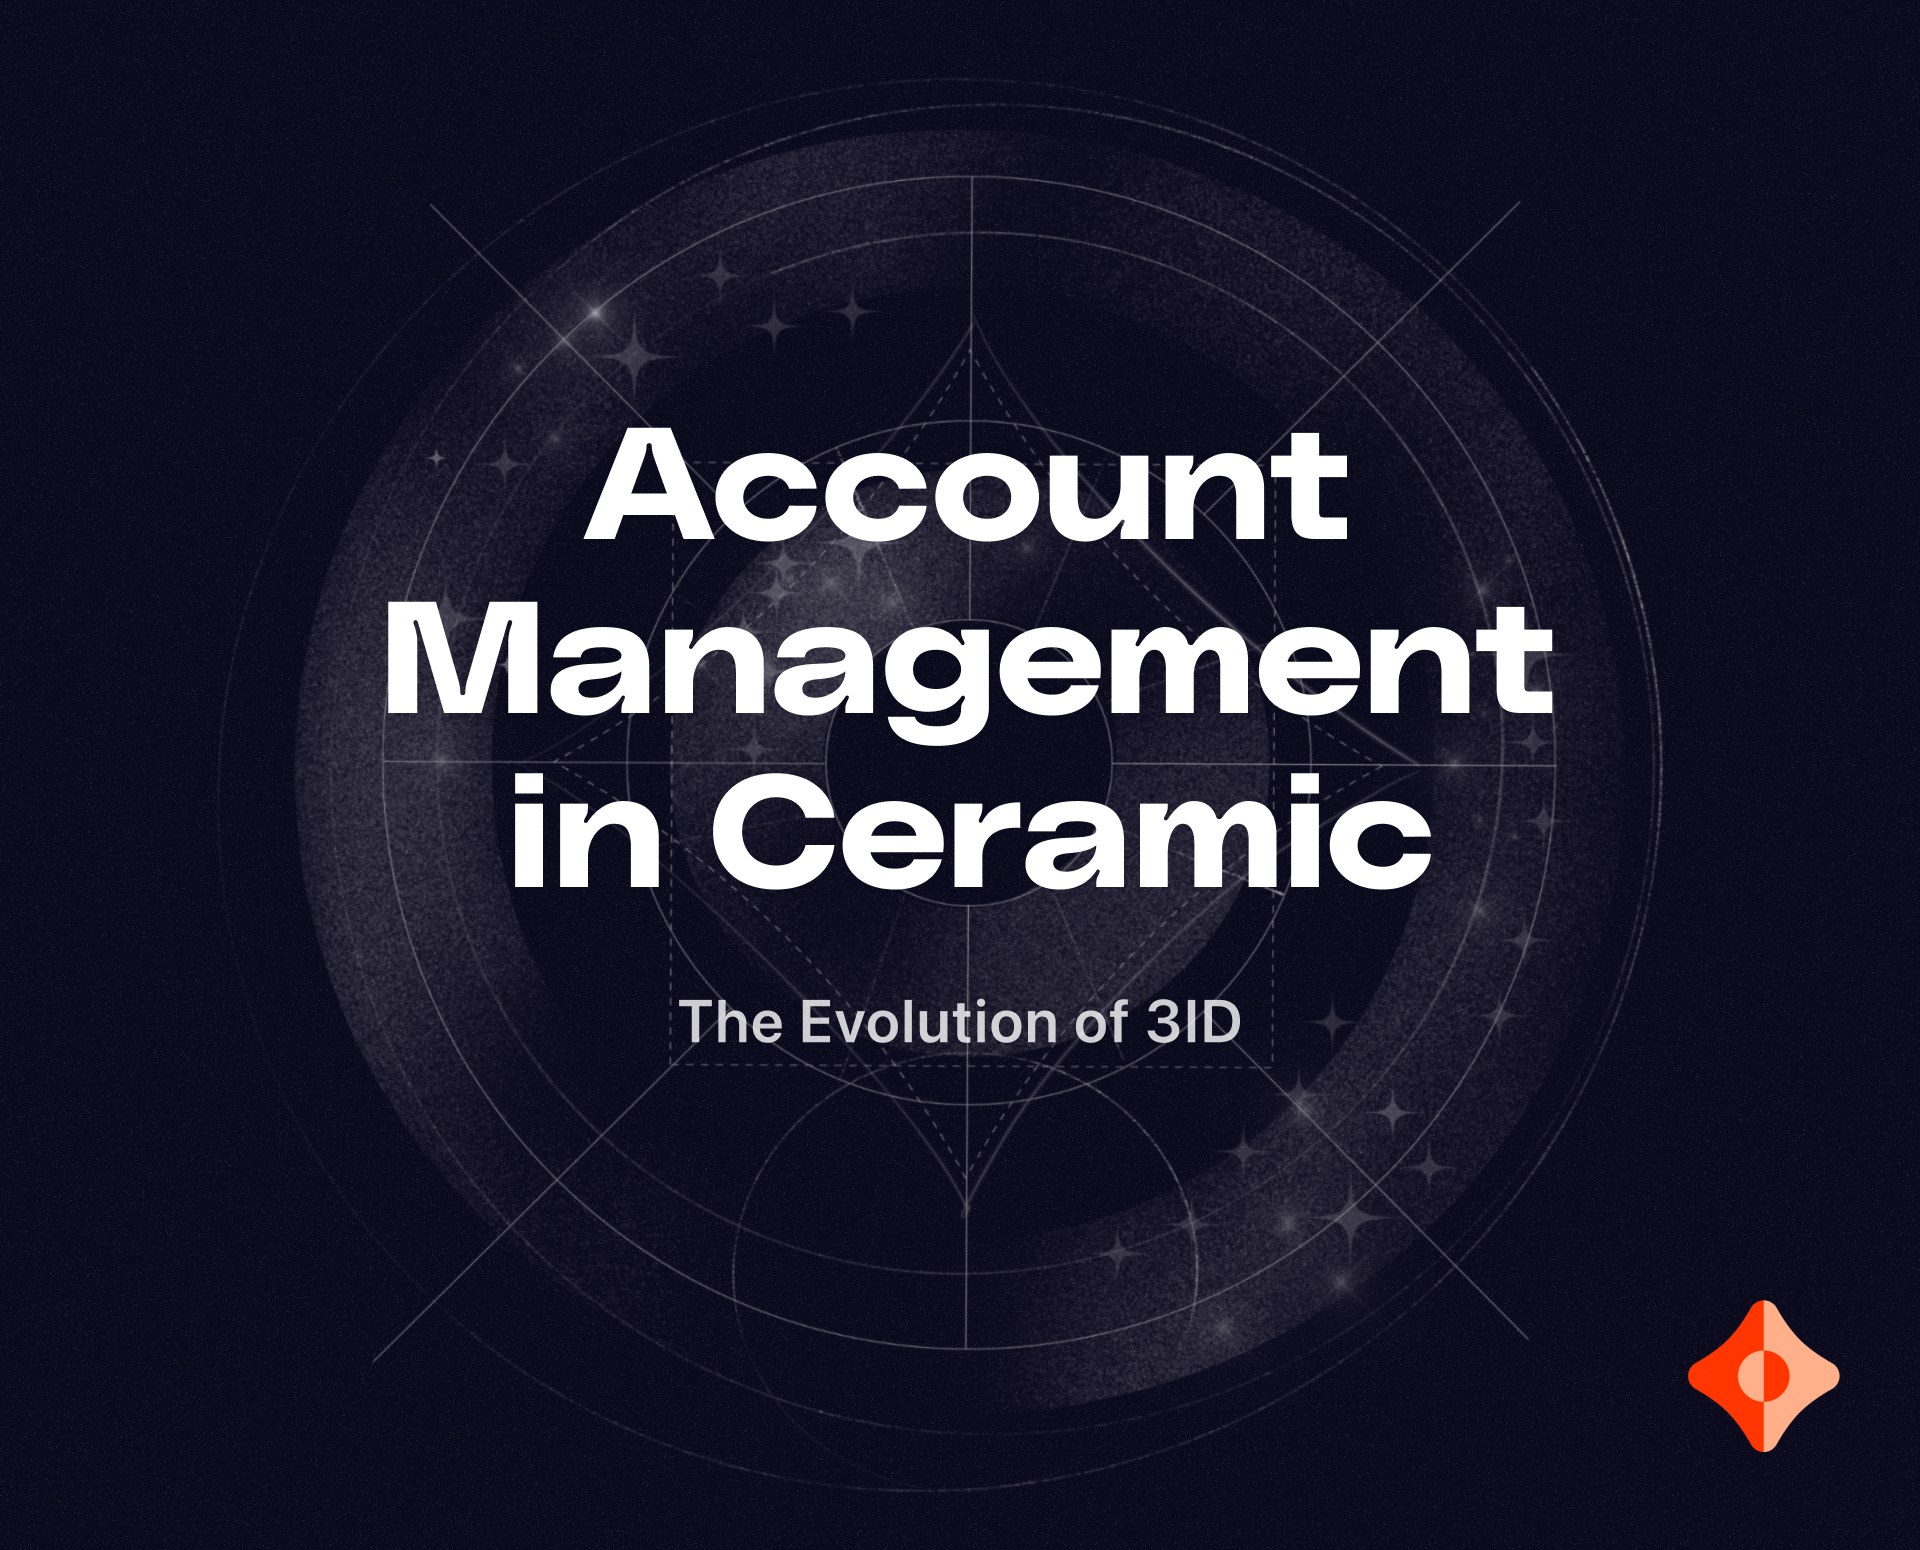 Account Management in Ceramic: The Evolution of 3ID